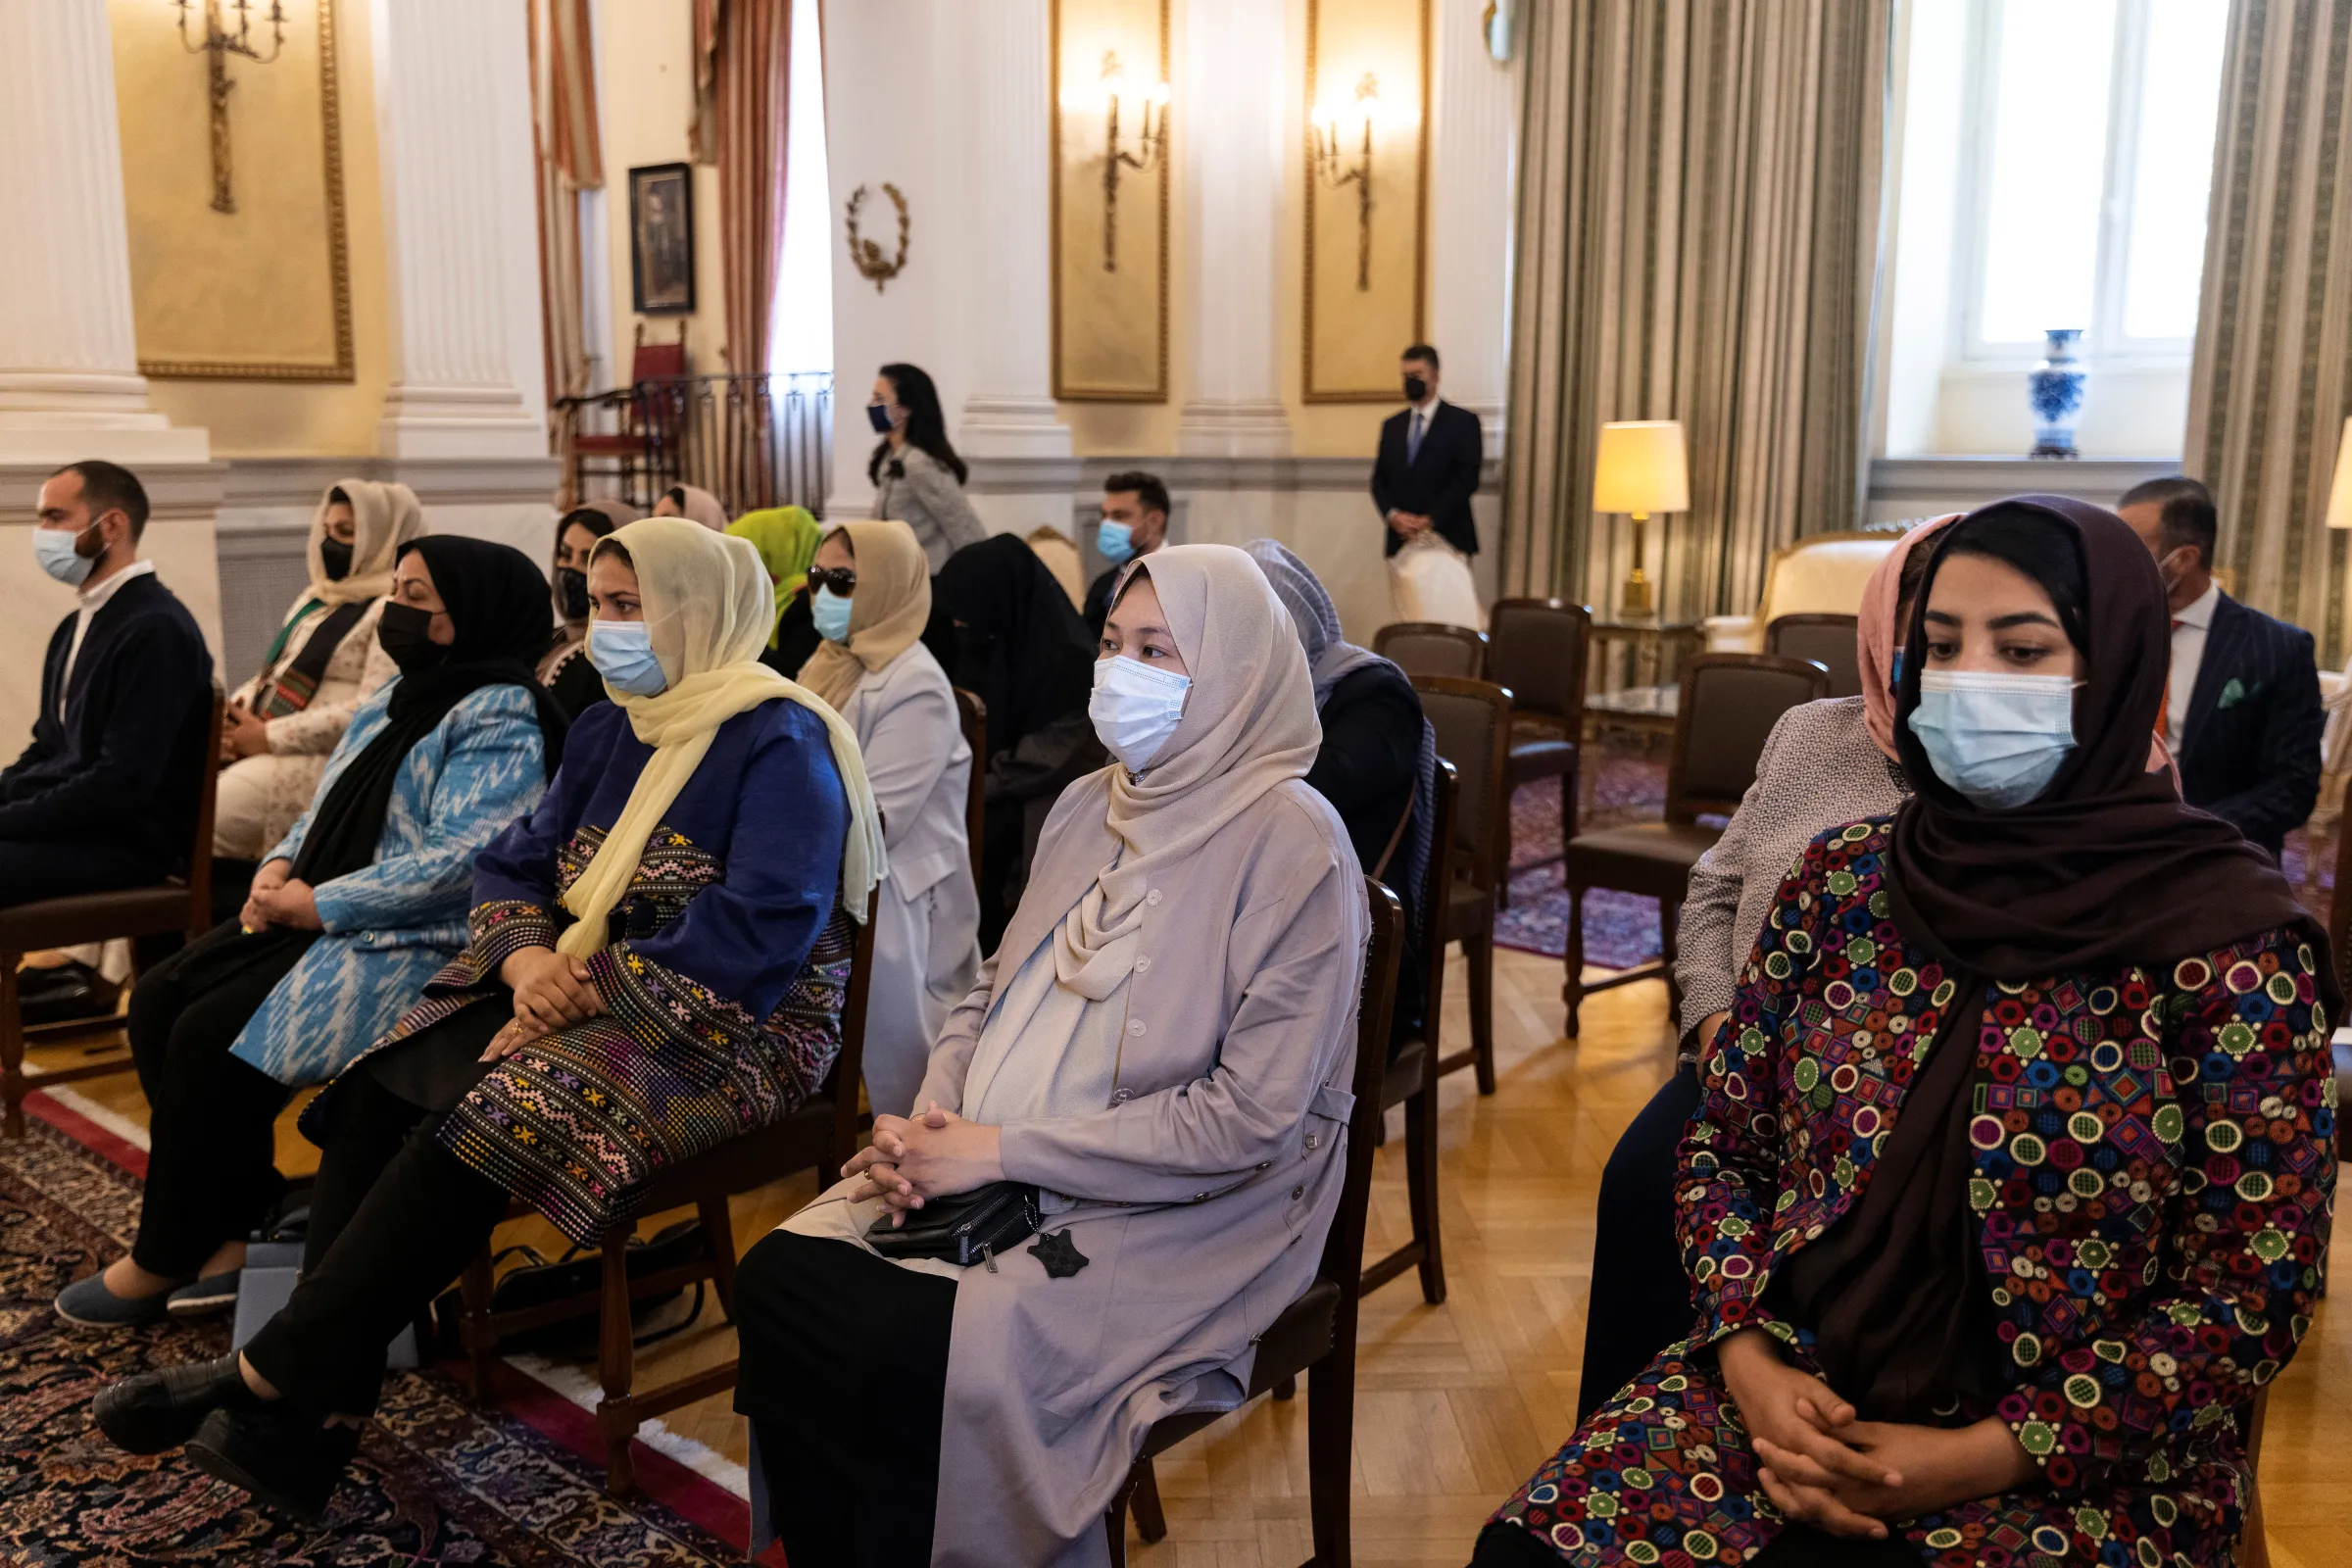 Afghan women lawyers and judges, who fled Afghanistan following the Taliban takeover, sit in a room wearing facemasks